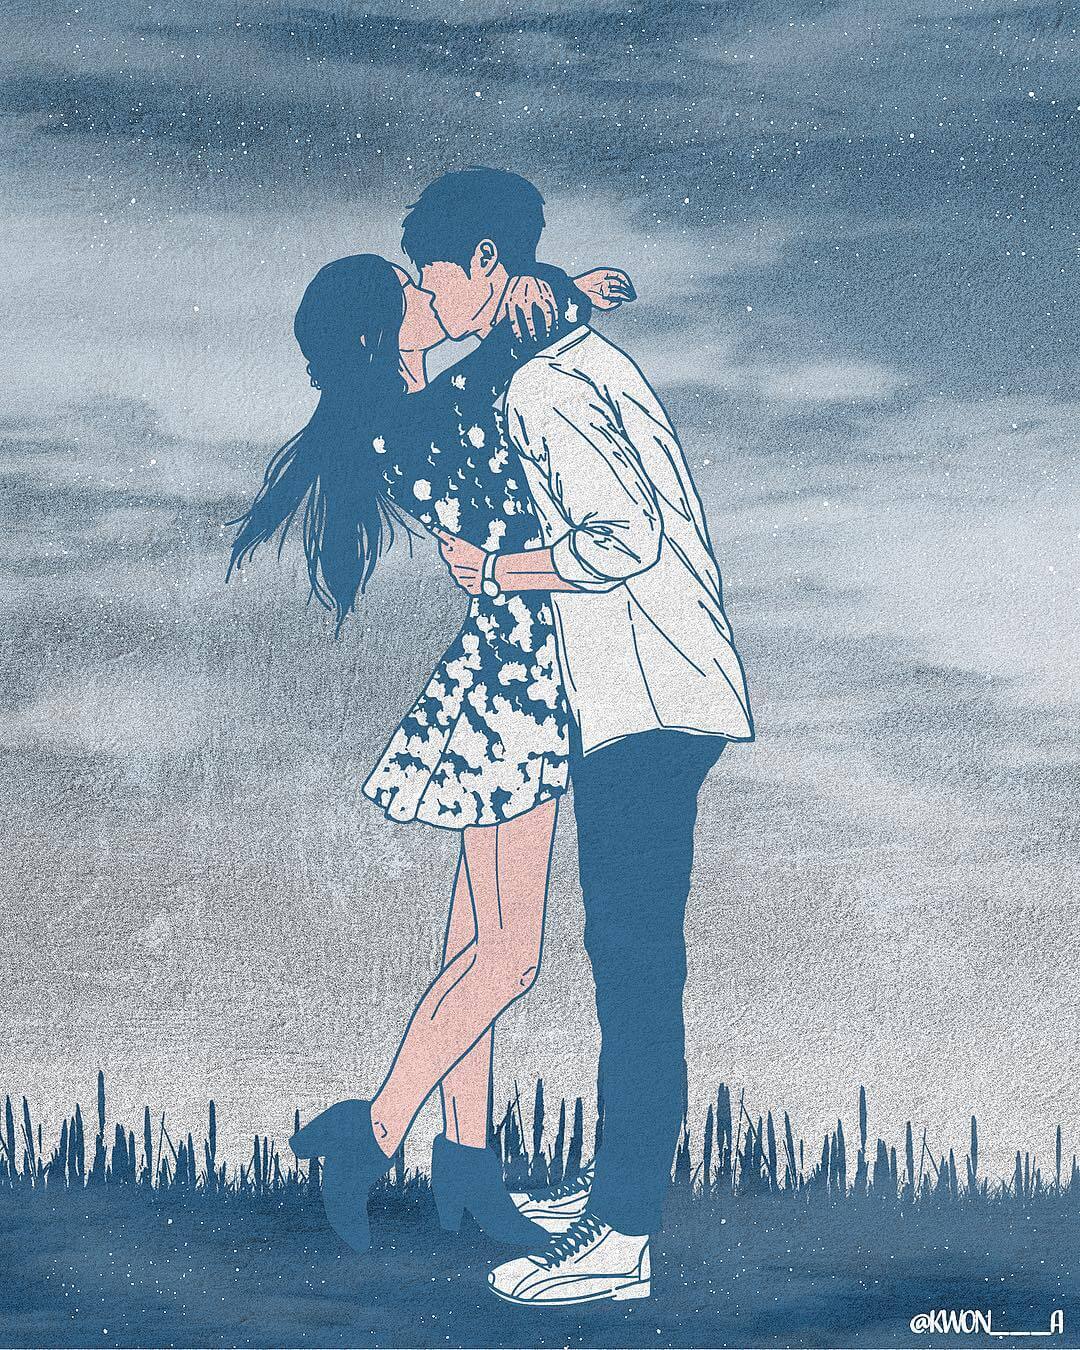 40 Powerful Illustrations Depict The Meaning Of True Love